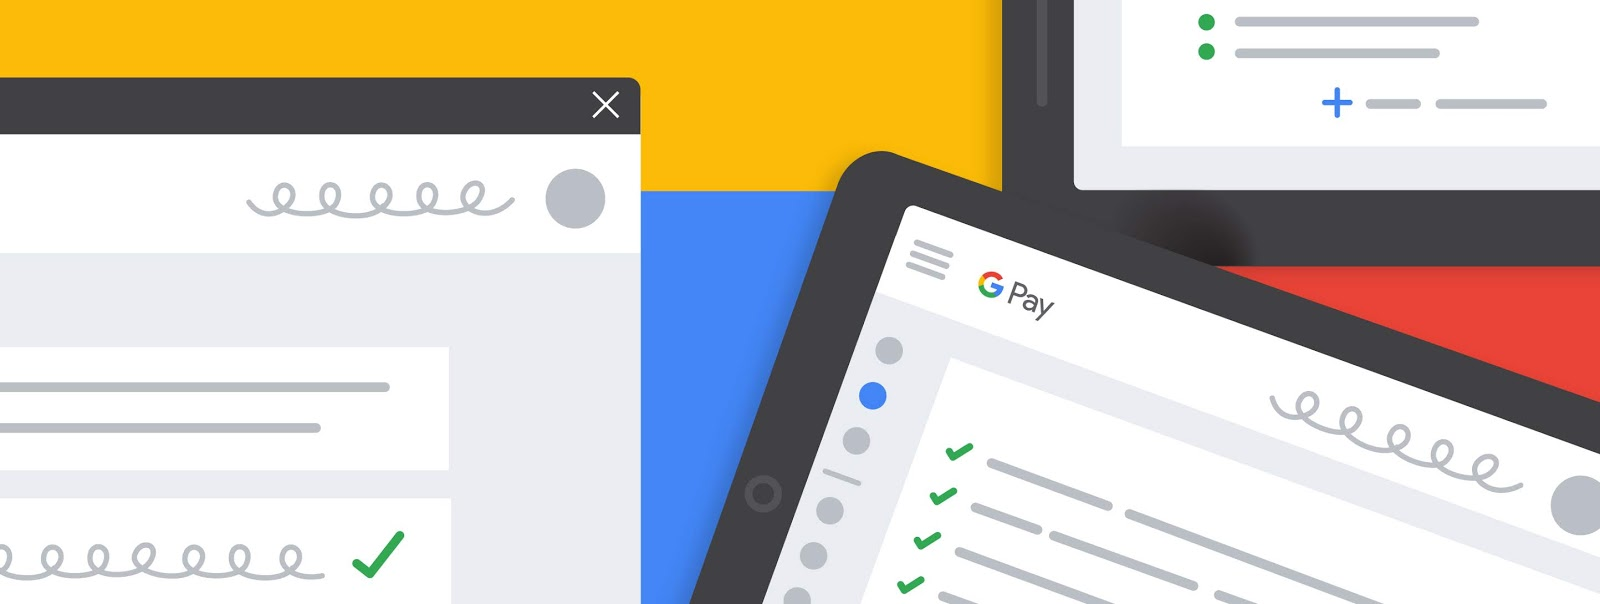 Manage your passes from Google Pay and Wallet Console